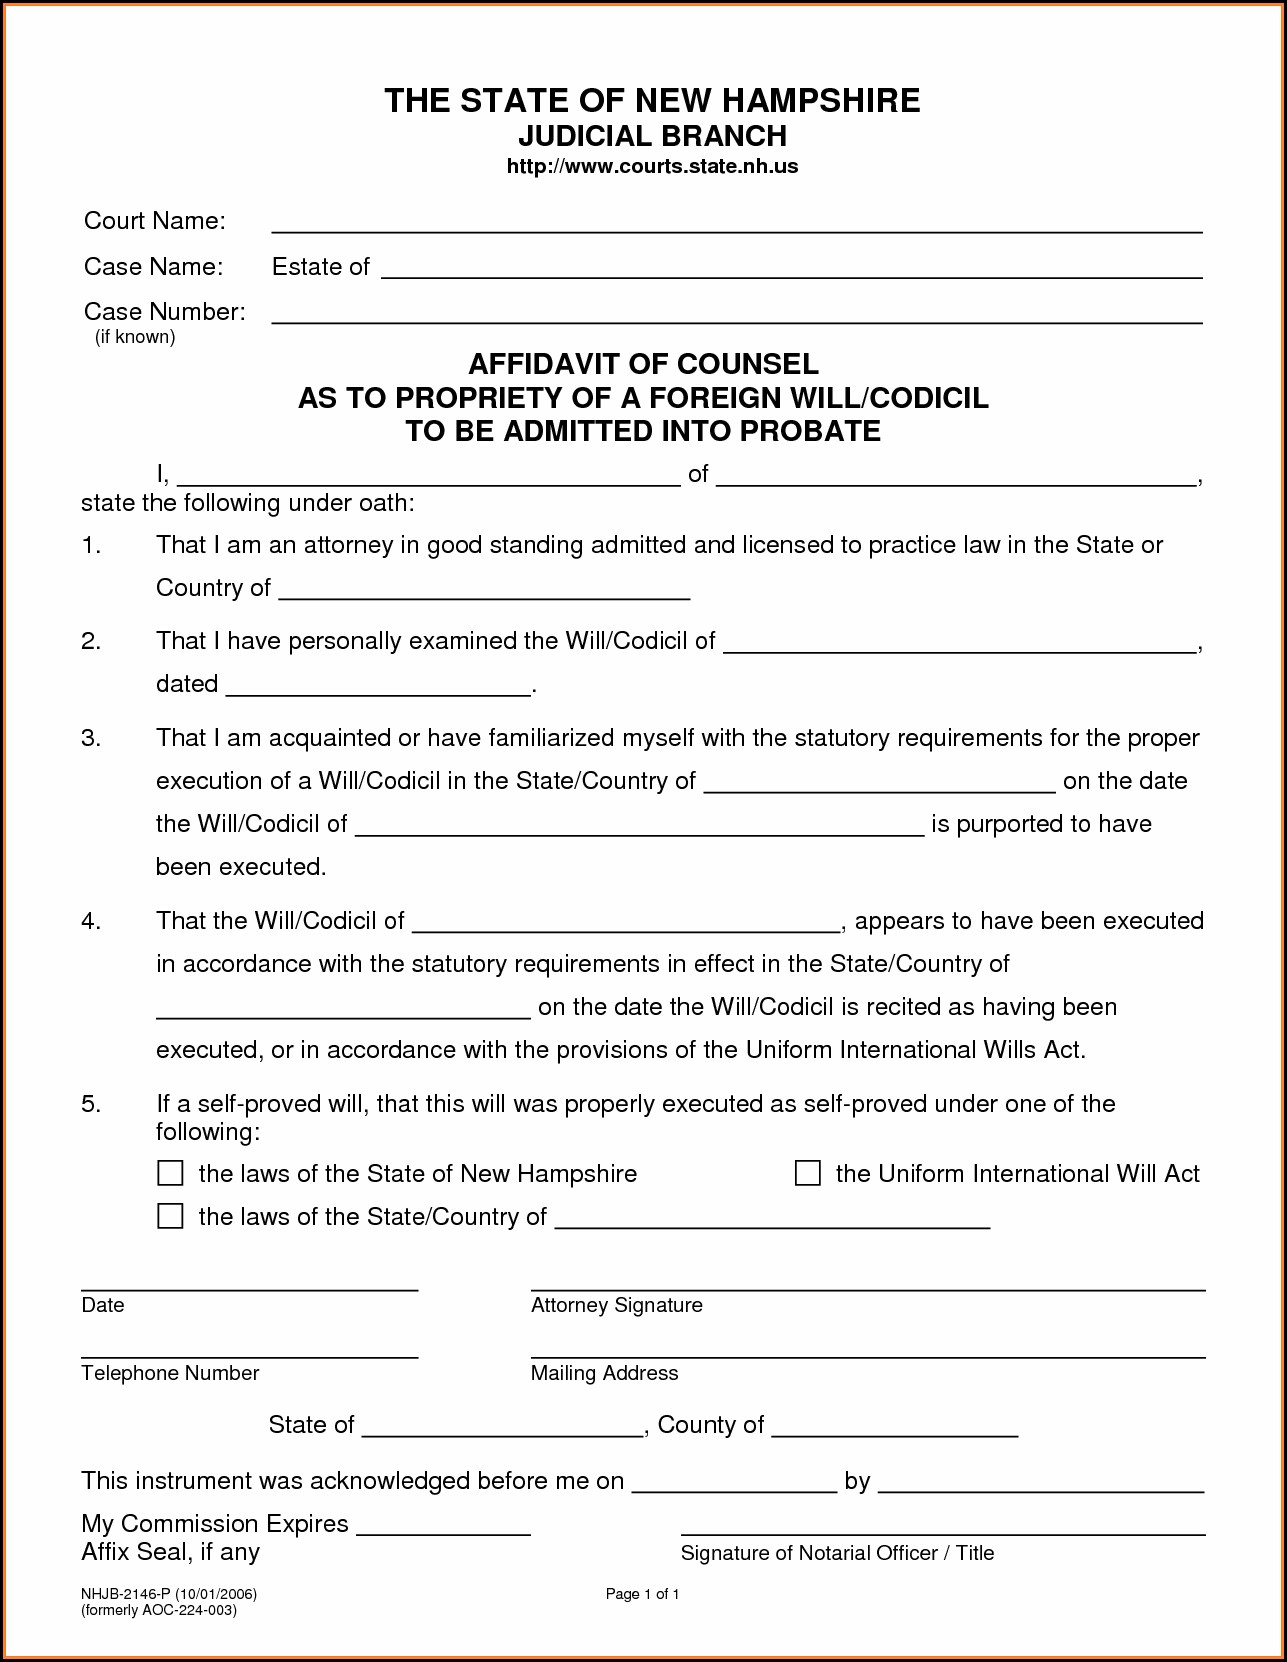 Printable Last Will And Testament Form Texas